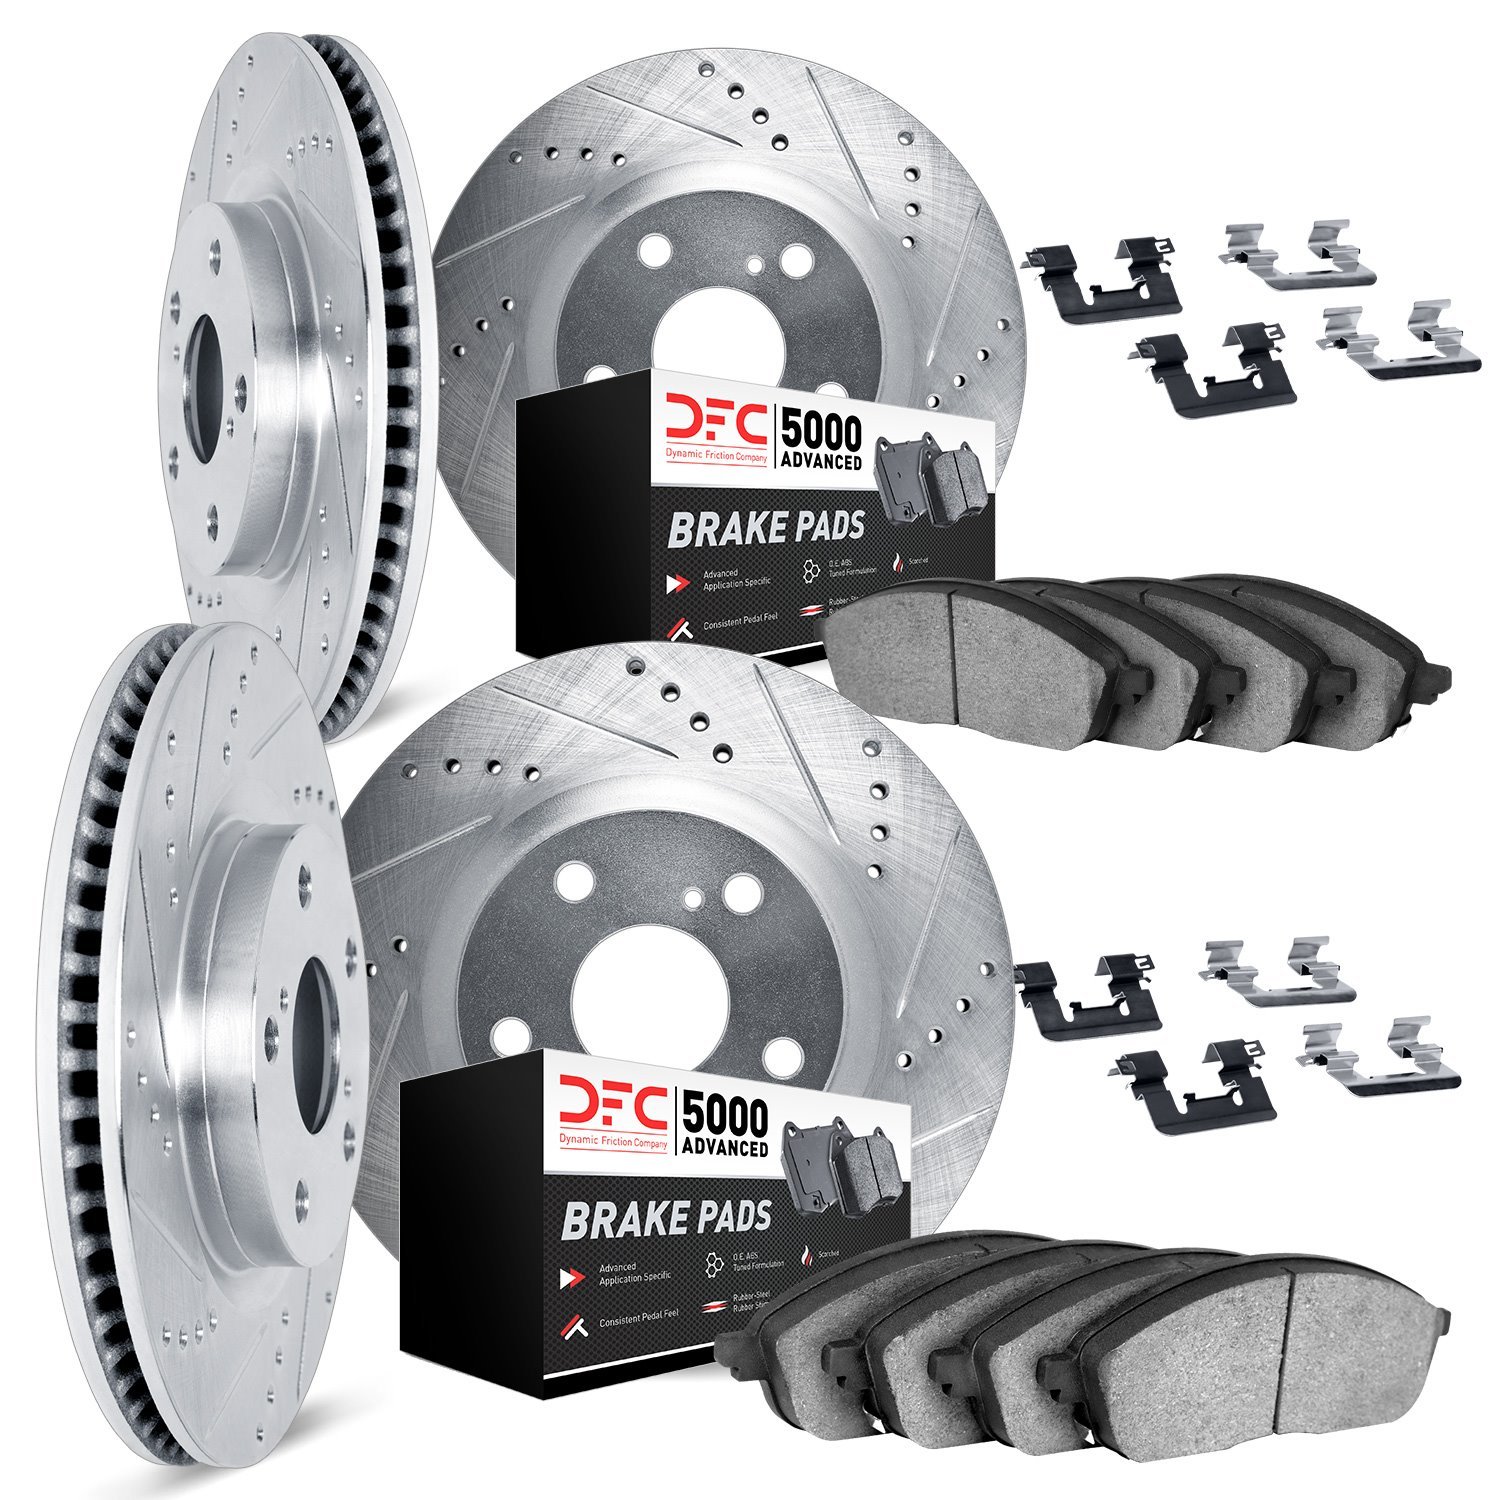 7514-40027 Drilled/Slotted Brake Rotors w/5000 Advanced Brake Pads Kit & Hardware [Silver], 2006-2018 Mopar, Position: Front and